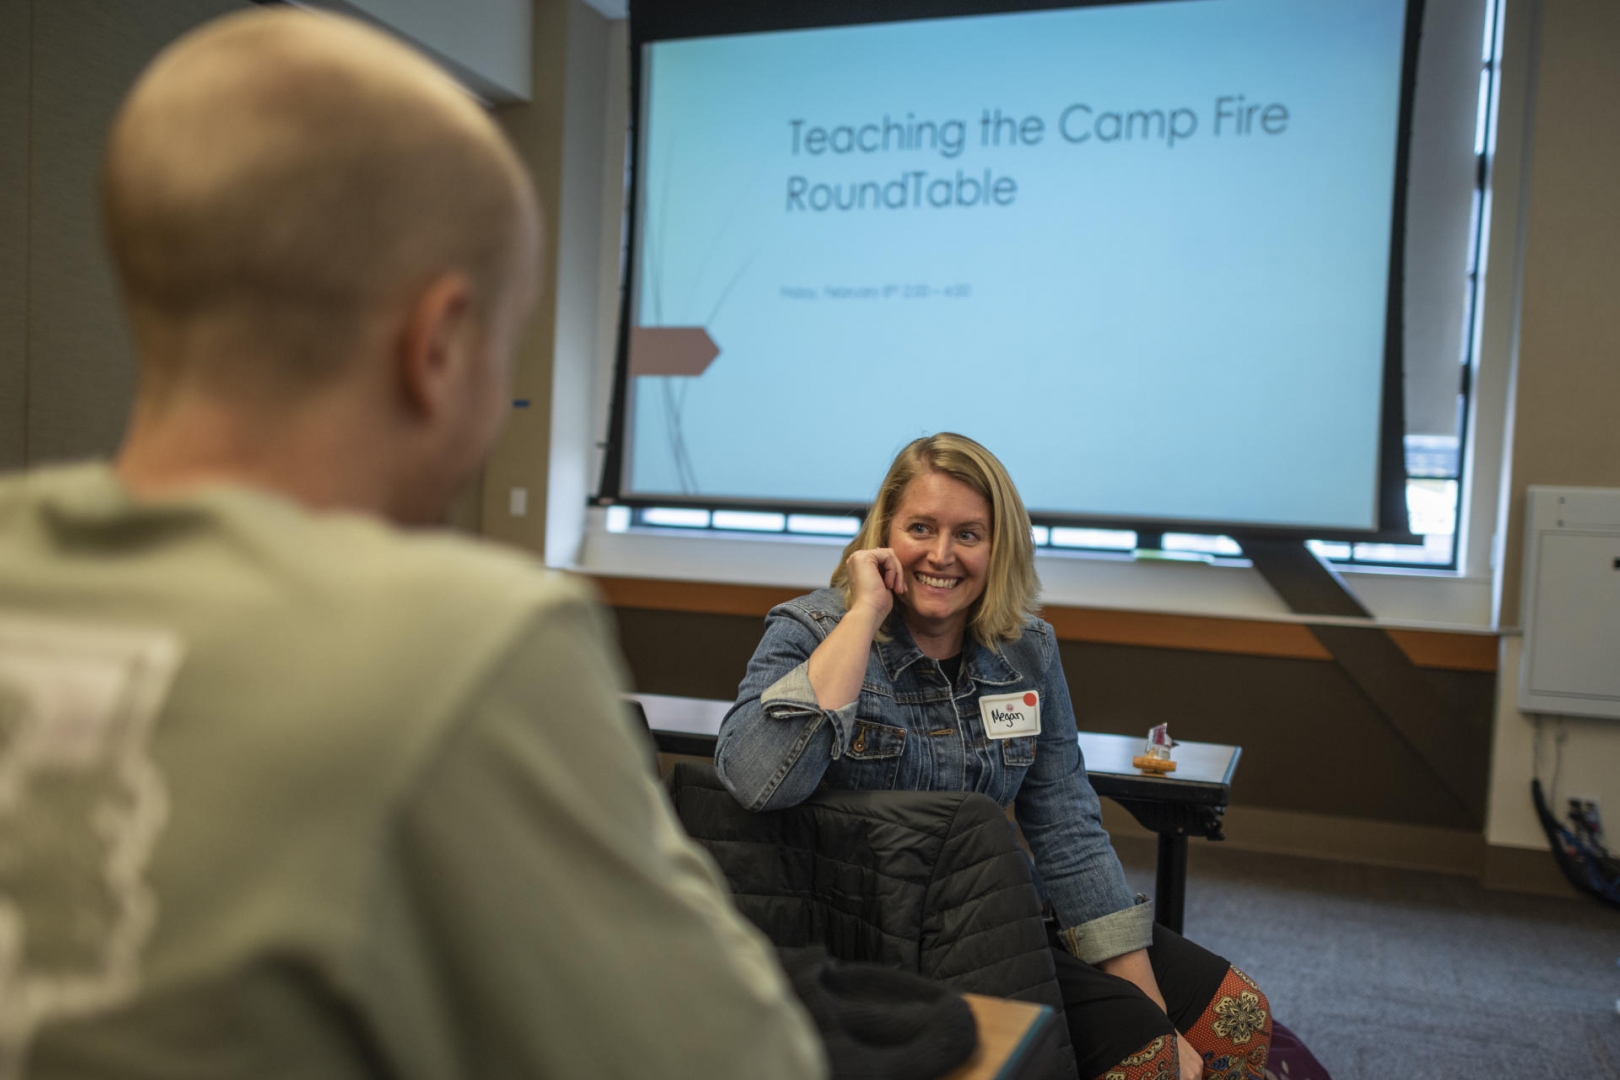 As she waits to speak in front of educators about teaching the Camp Fire on campus, she smiles and shares a lighthearted moment with a colleague.